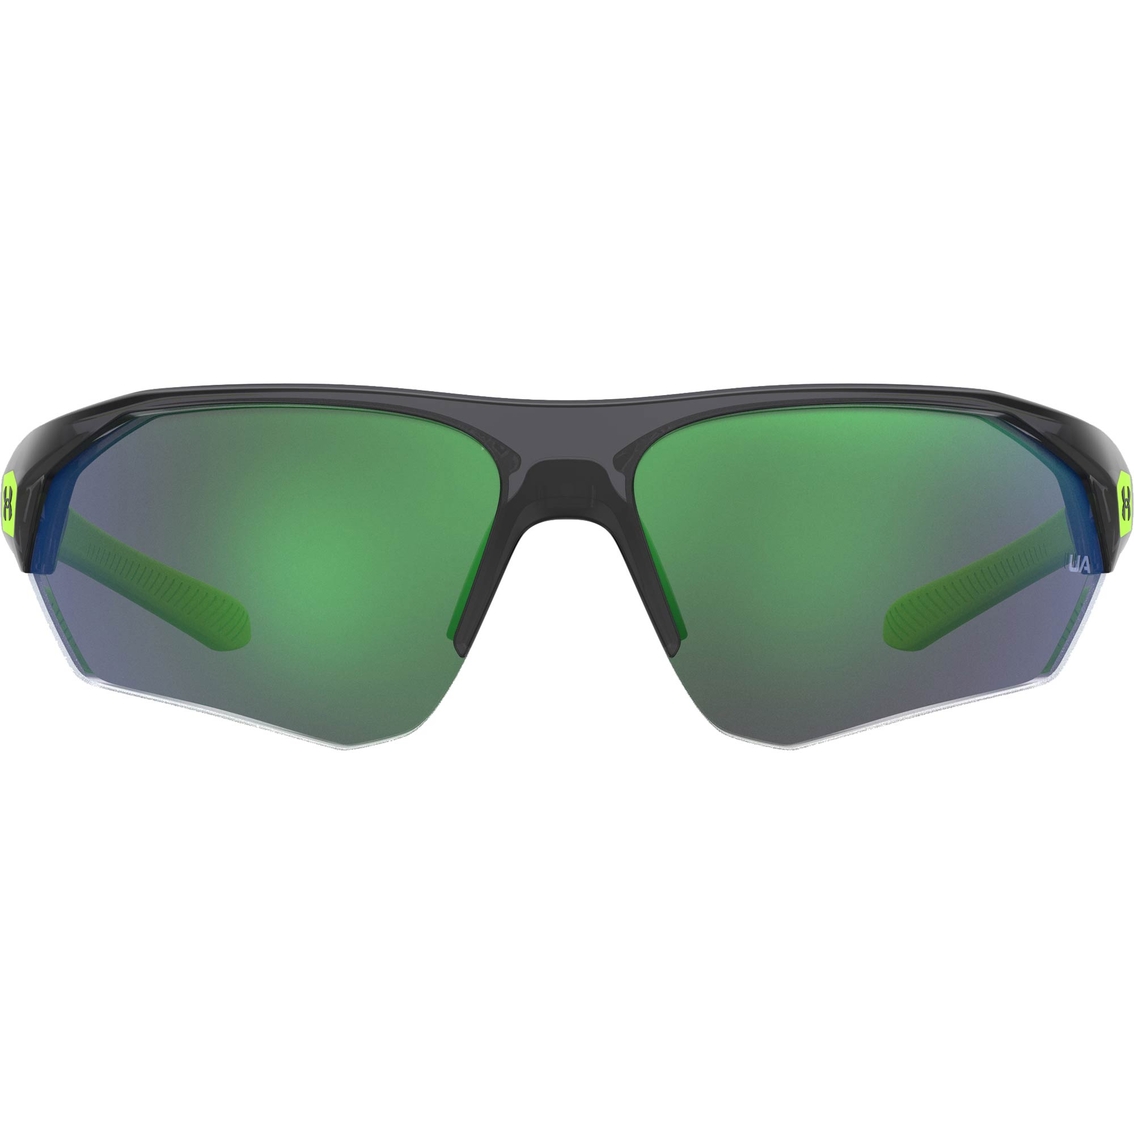 Under Armour Youth Dual Lens Sunglasses UA7000/S - Image 2 of 4